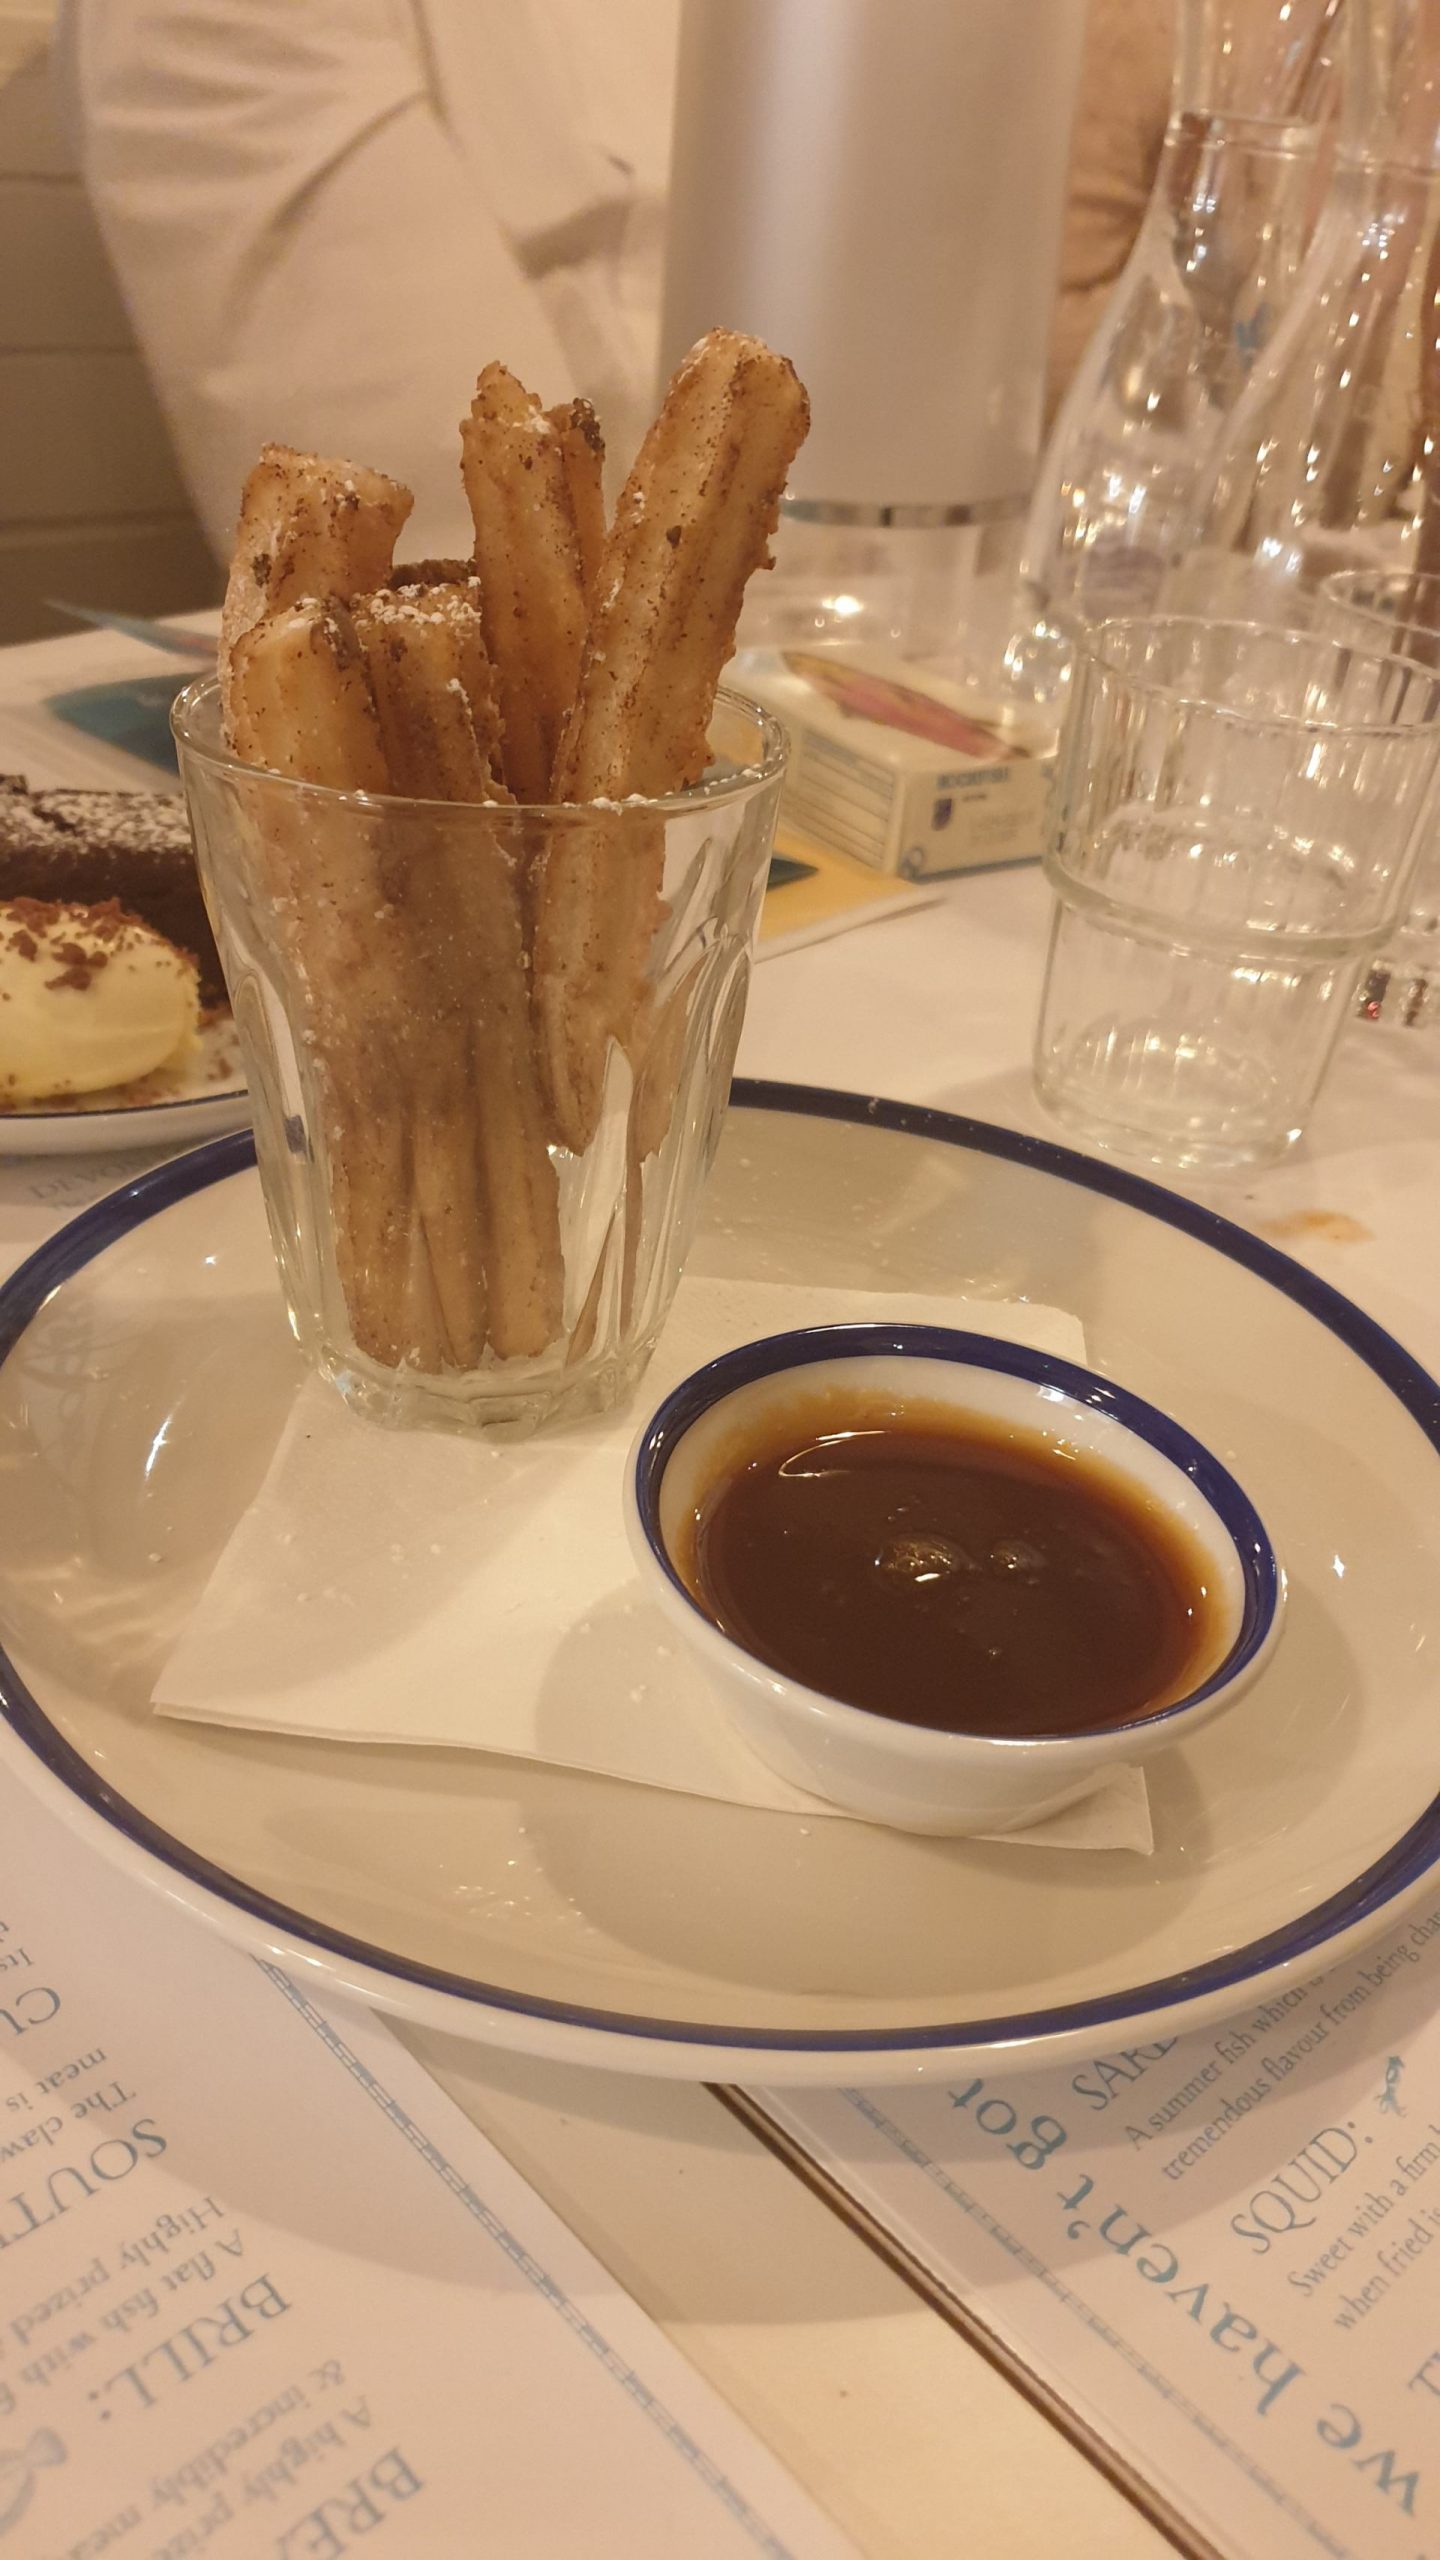 Gluten free Churros and salted caramel dip